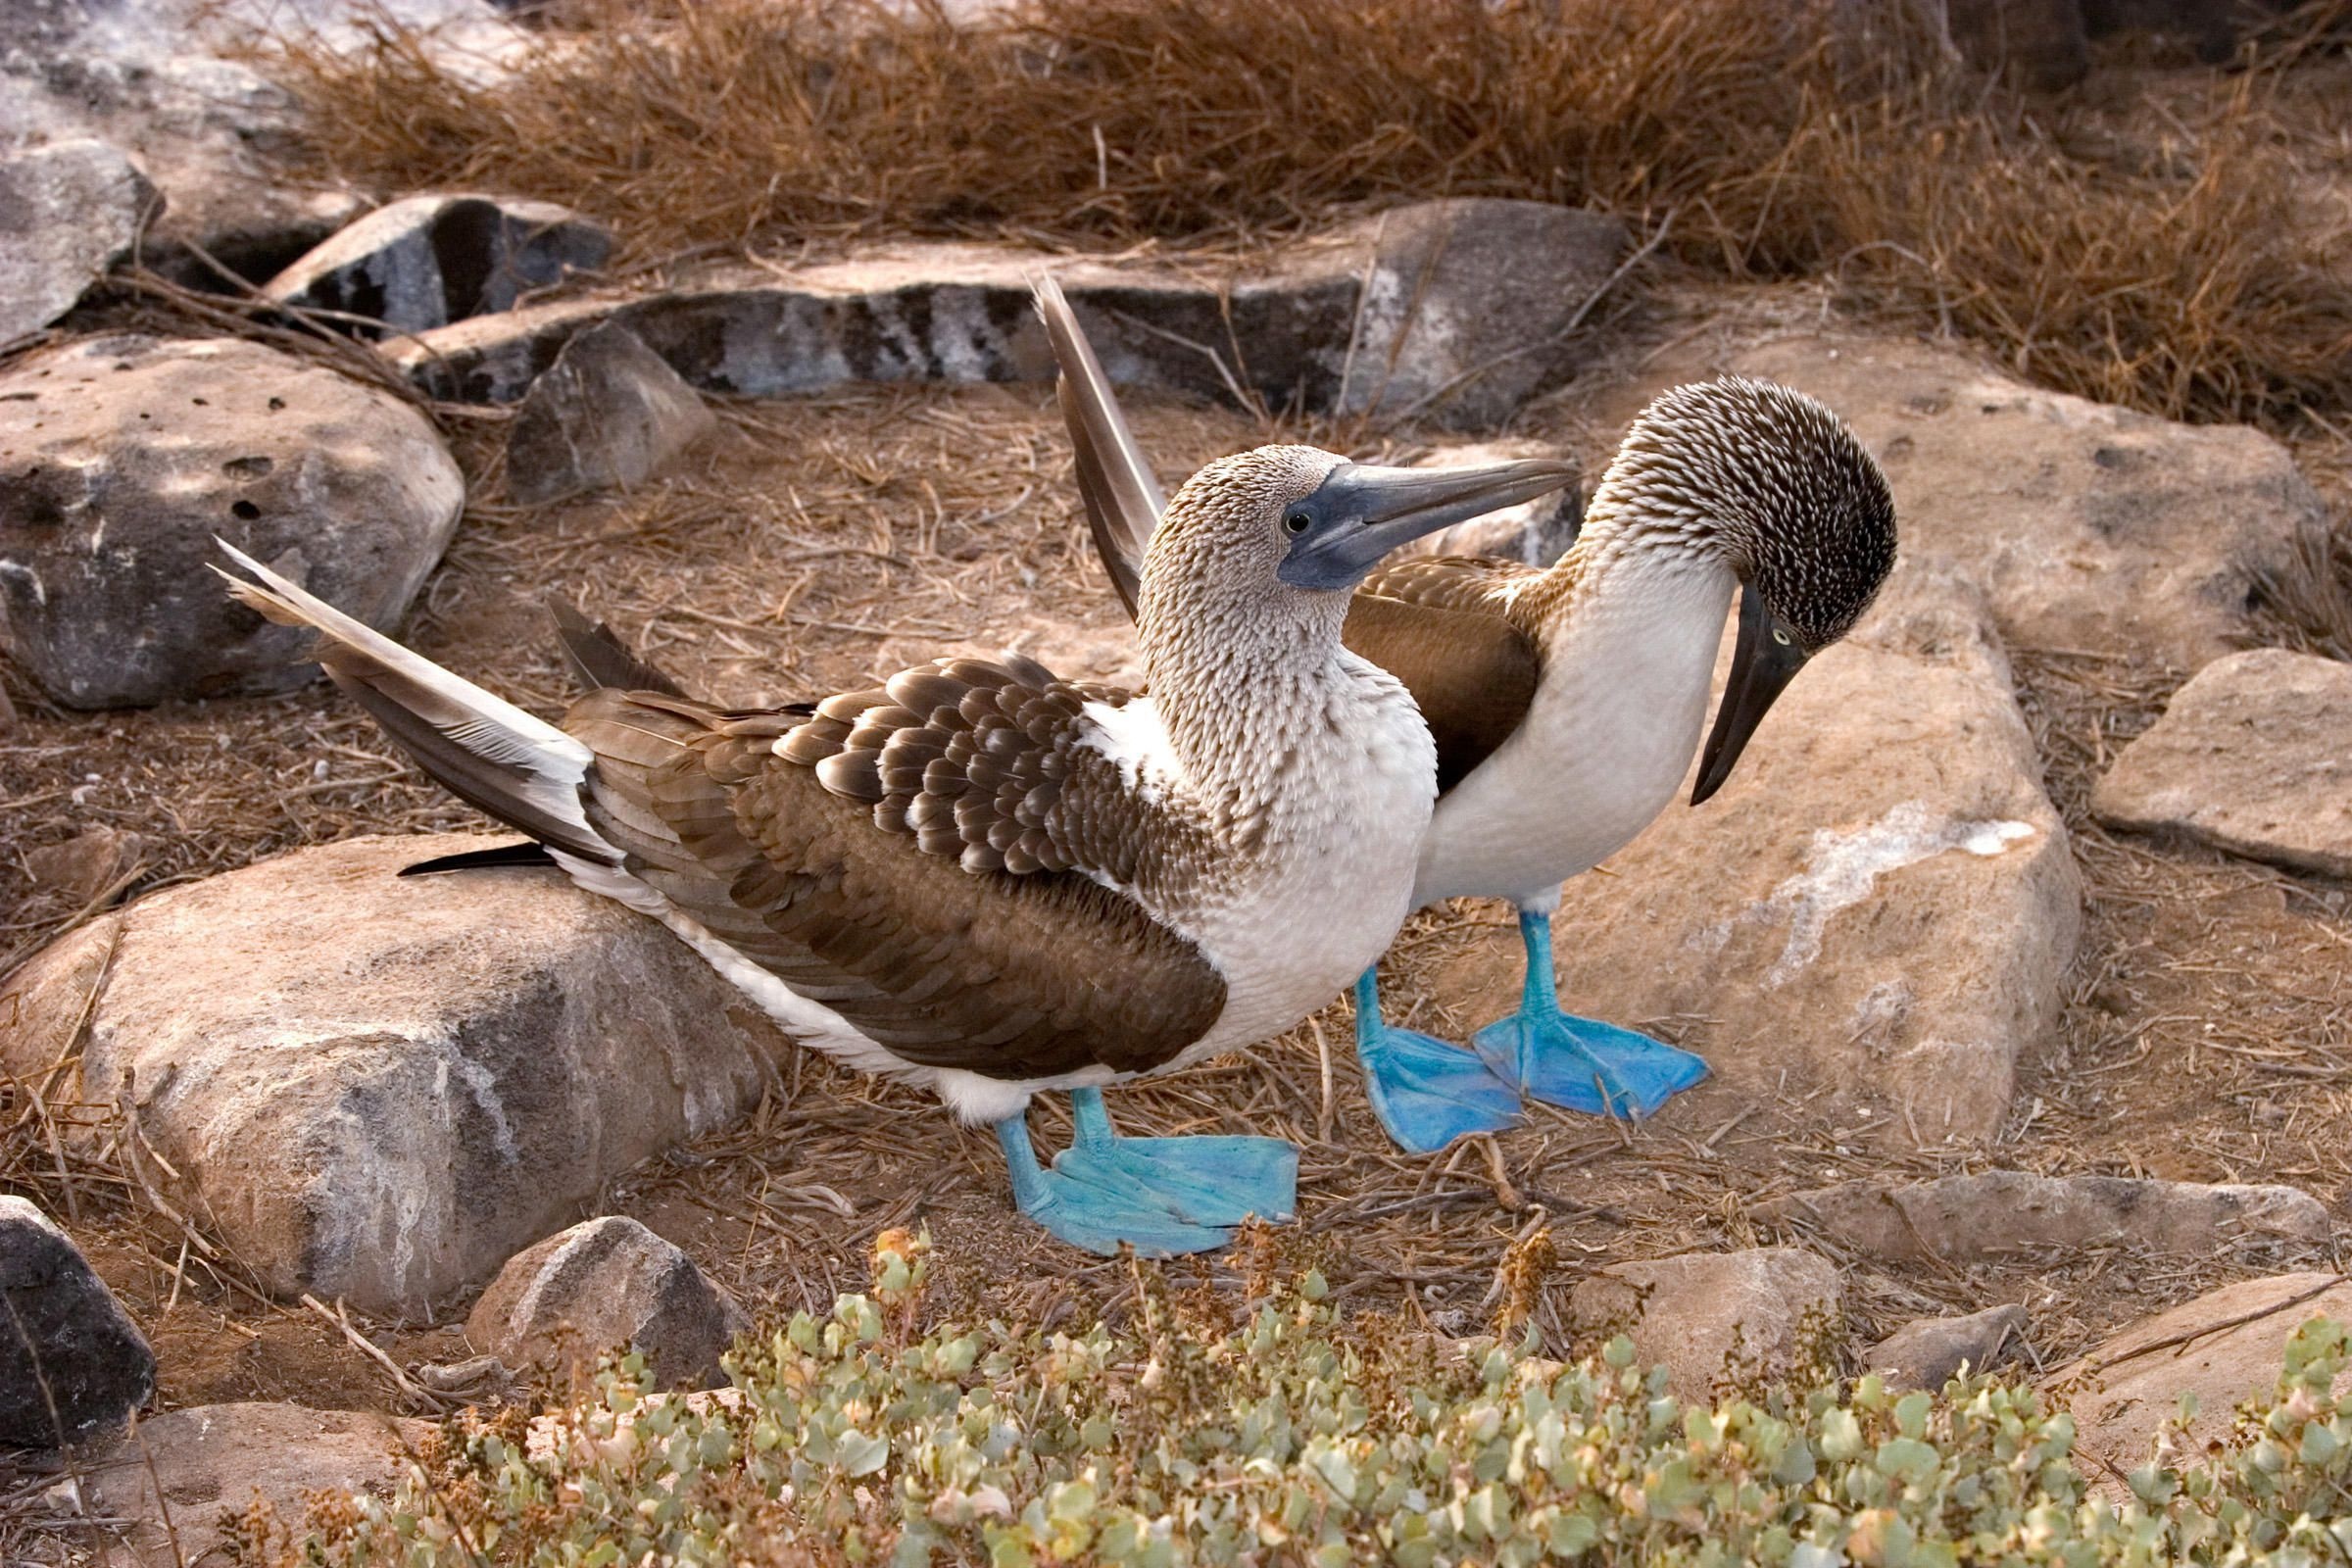 Blue footed booby, High definition wallpapers, Bird, Adorable, 2400x1600 HD Desktop